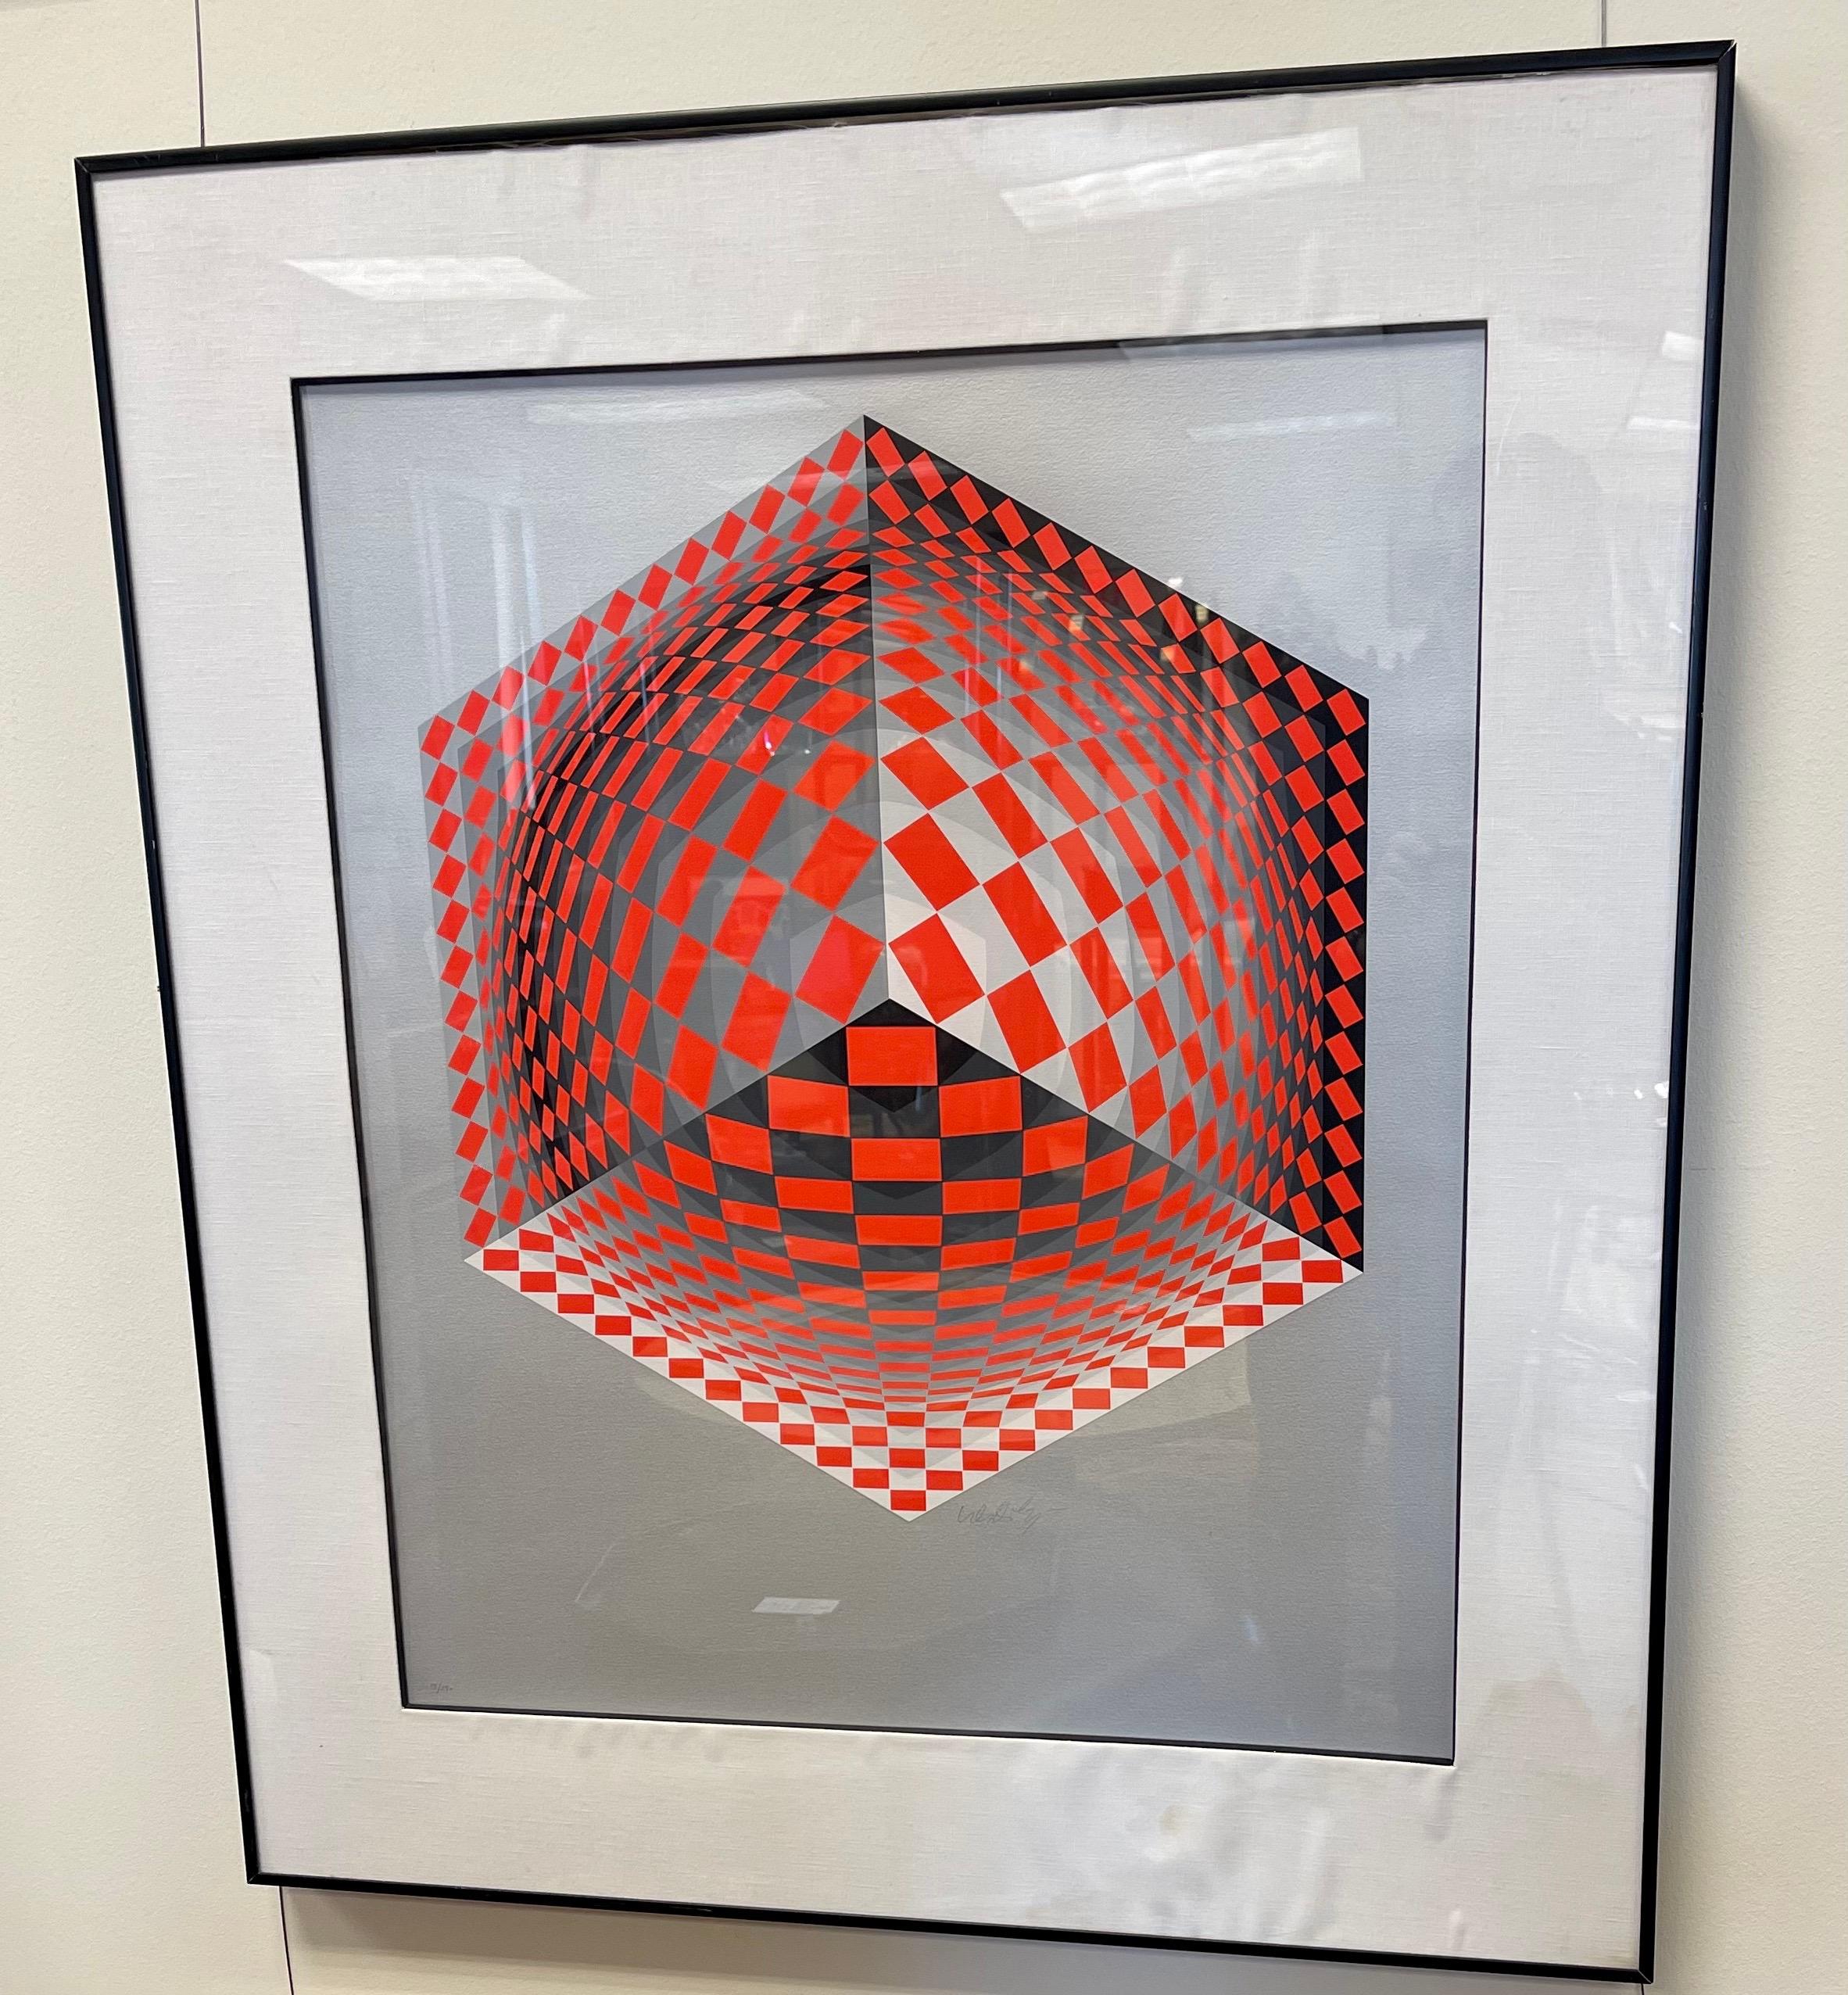 Victor Vasarely (French-Hungarian 1908 - 1997) serigraph on aluminum, optical art illusion with cubes. The work is signed and numbered in pencil - see attached pics. This particular work depicts an optical illusion with geometric cubes.
Op Art is a